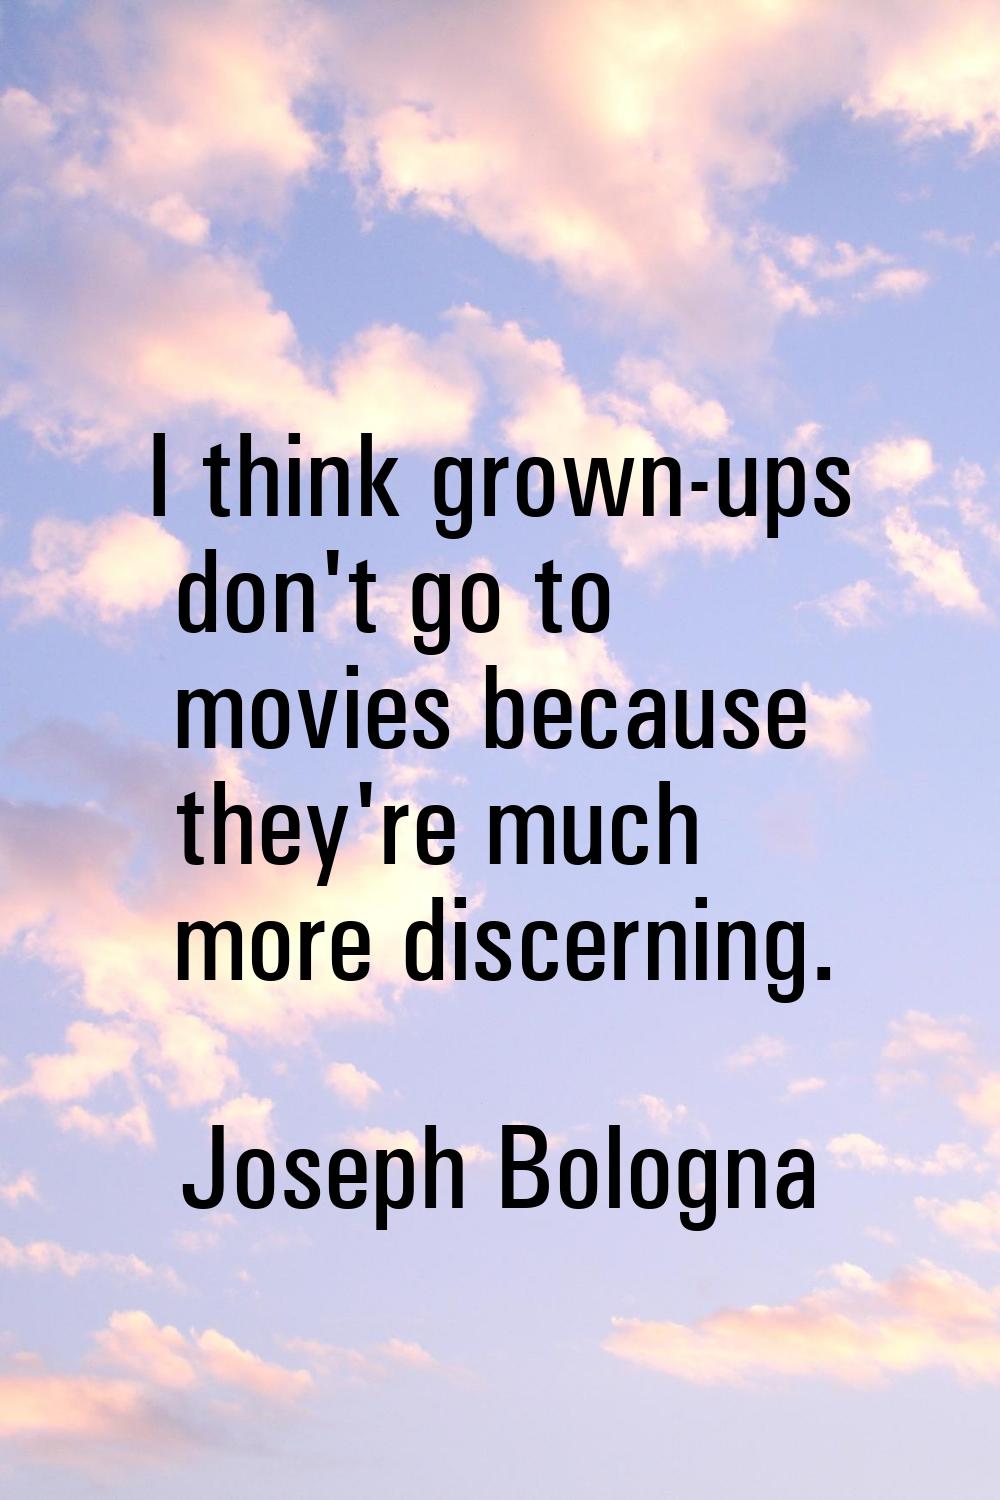 I think grown-ups don't go to movies because they're much more discerning.